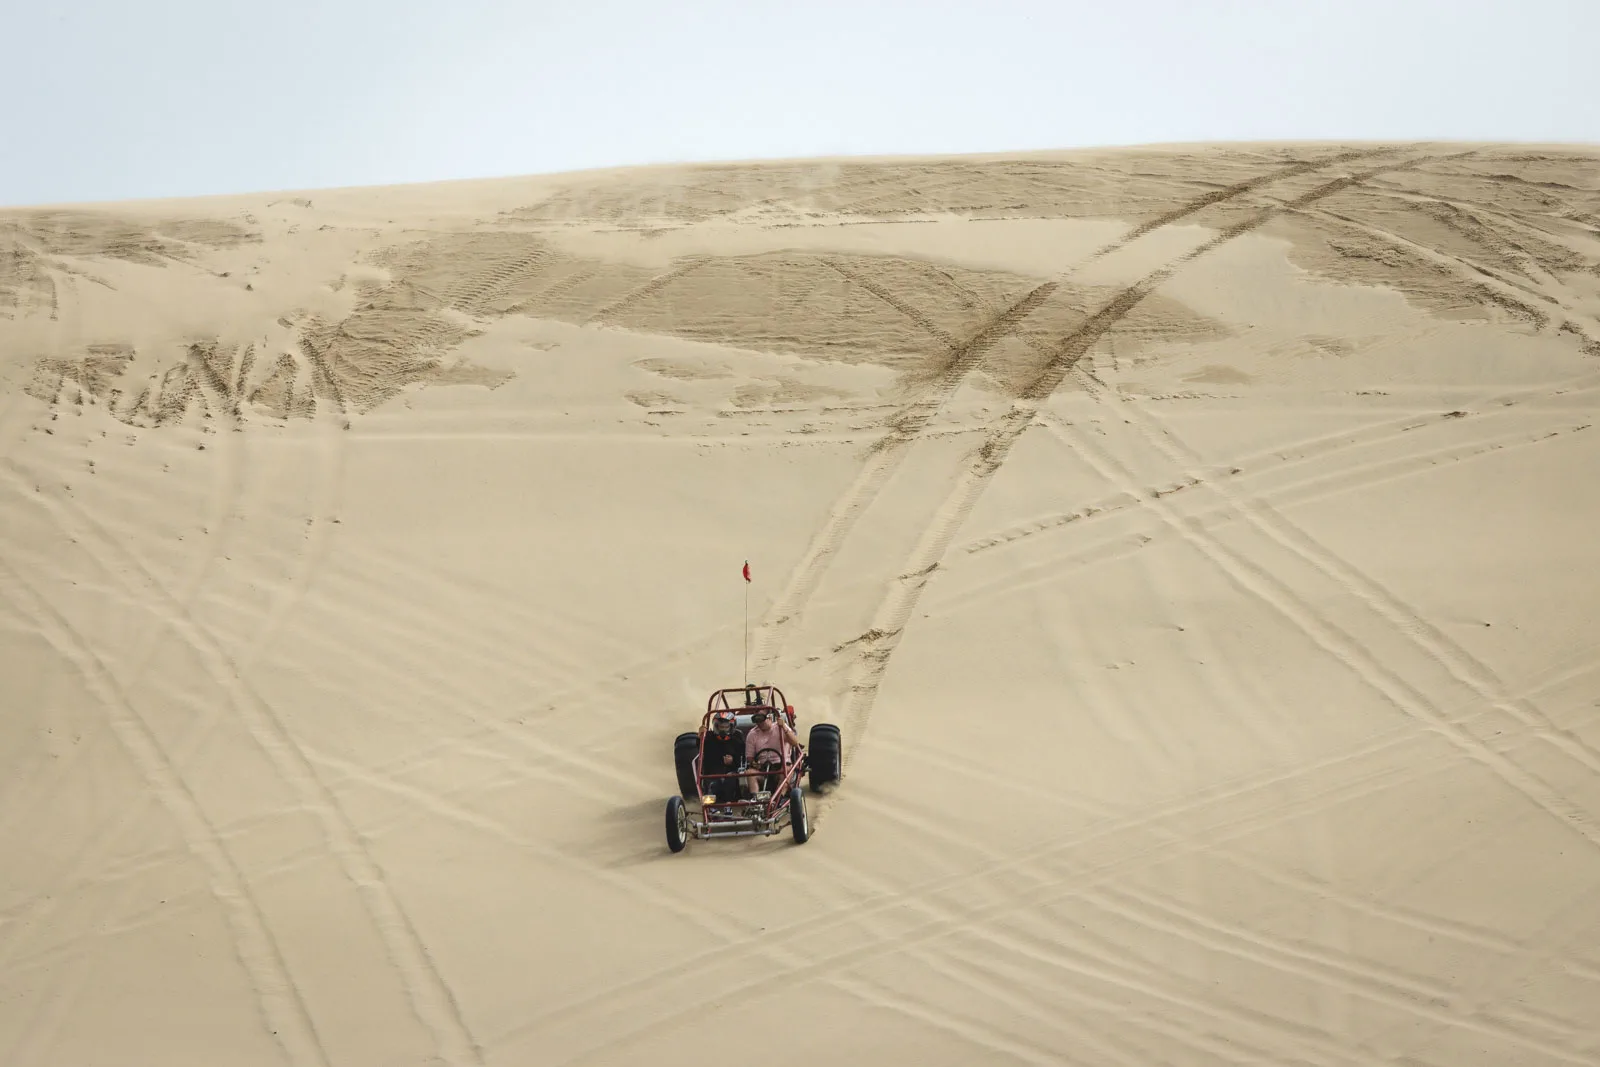 Dune buggies are a must when visiting Oregon sand dunes!